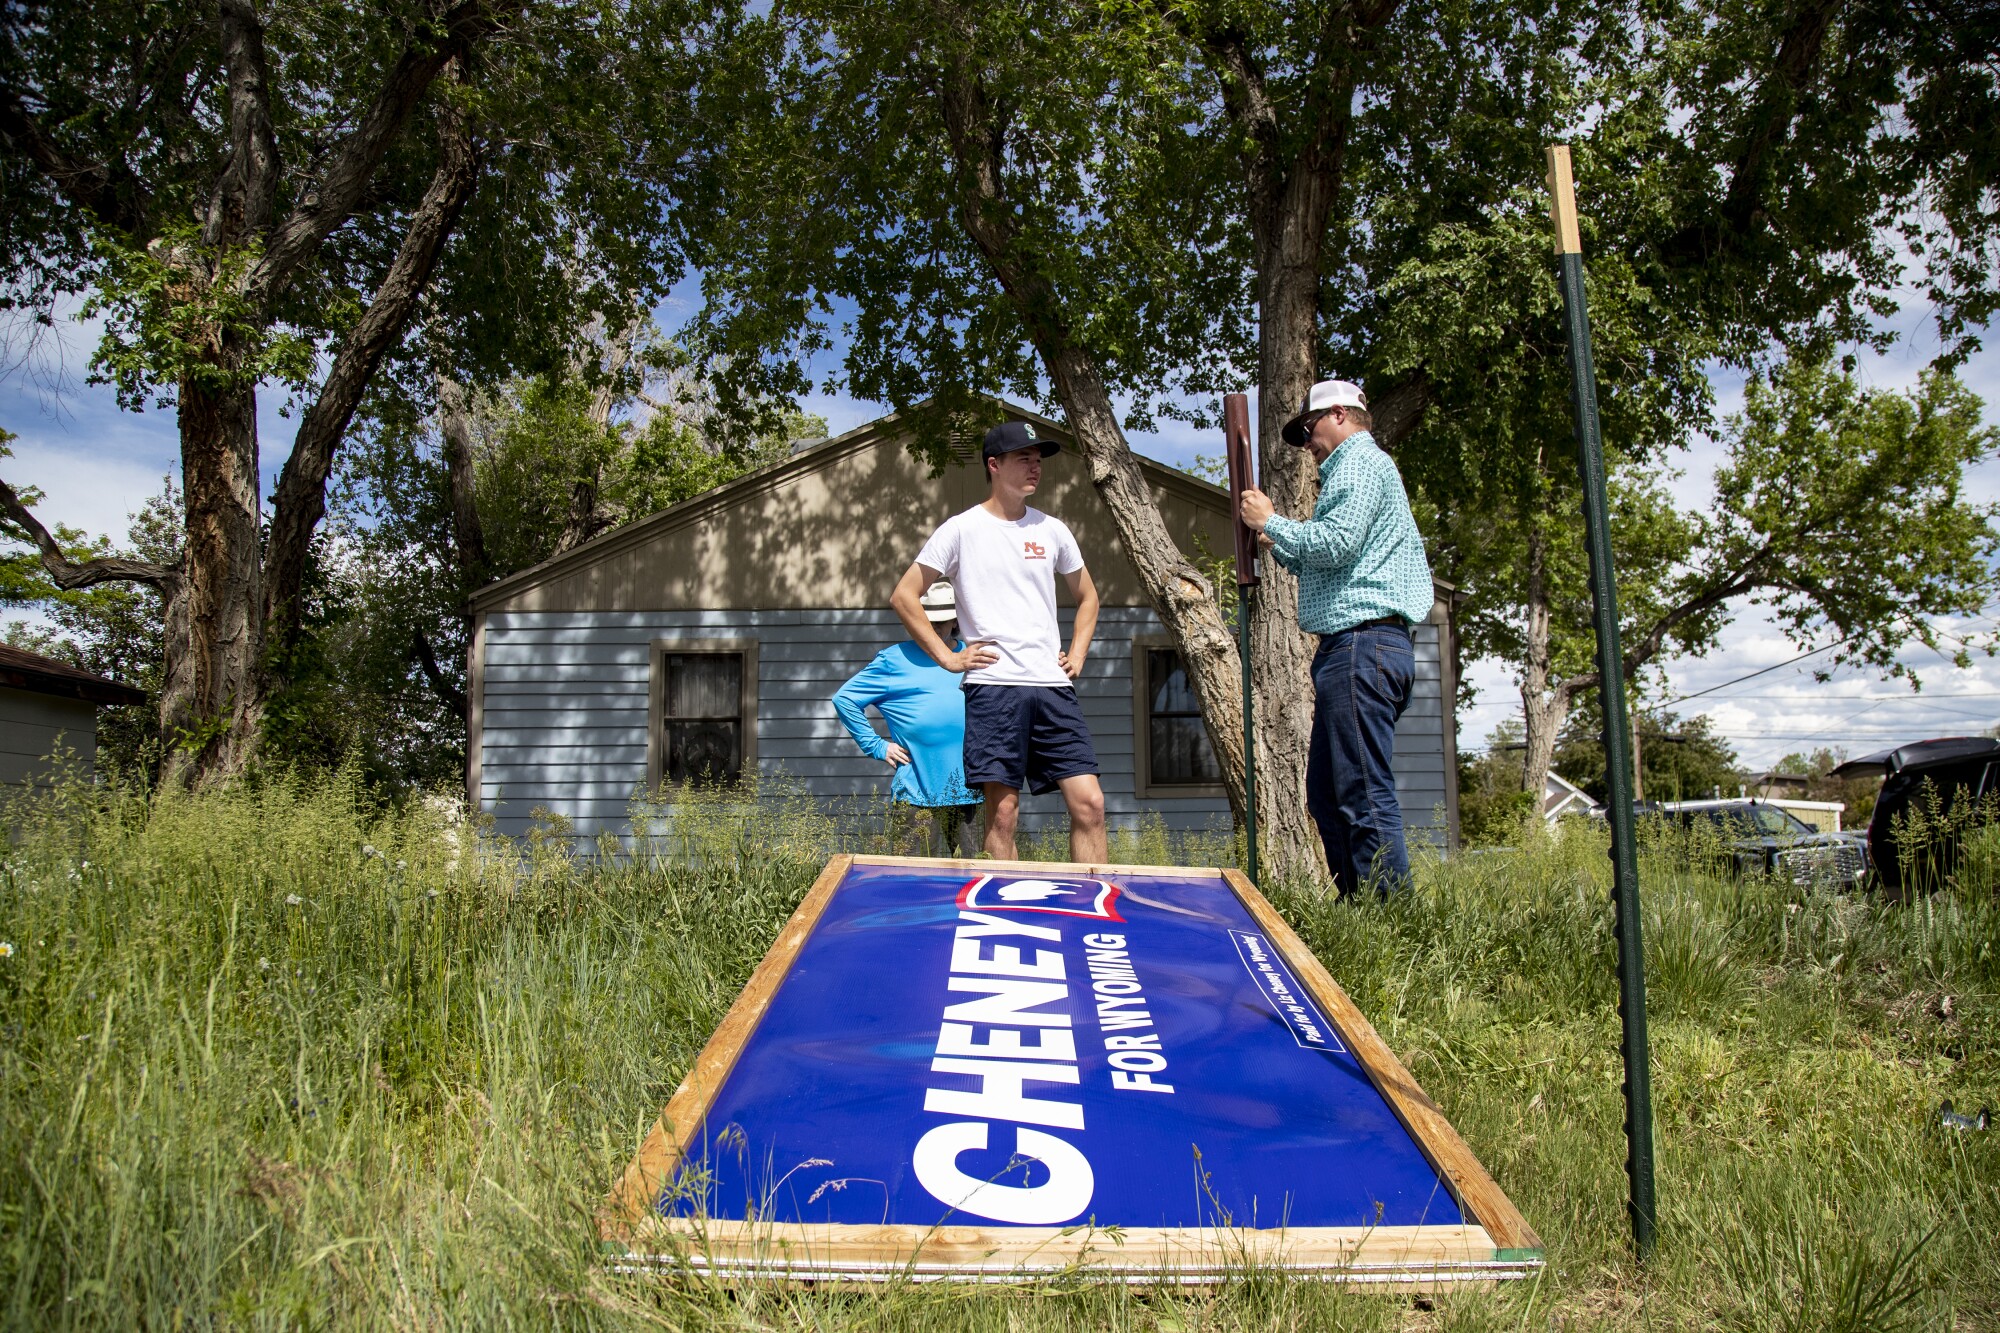 People stand next to a large blue "Cheney" sign before it's assembled